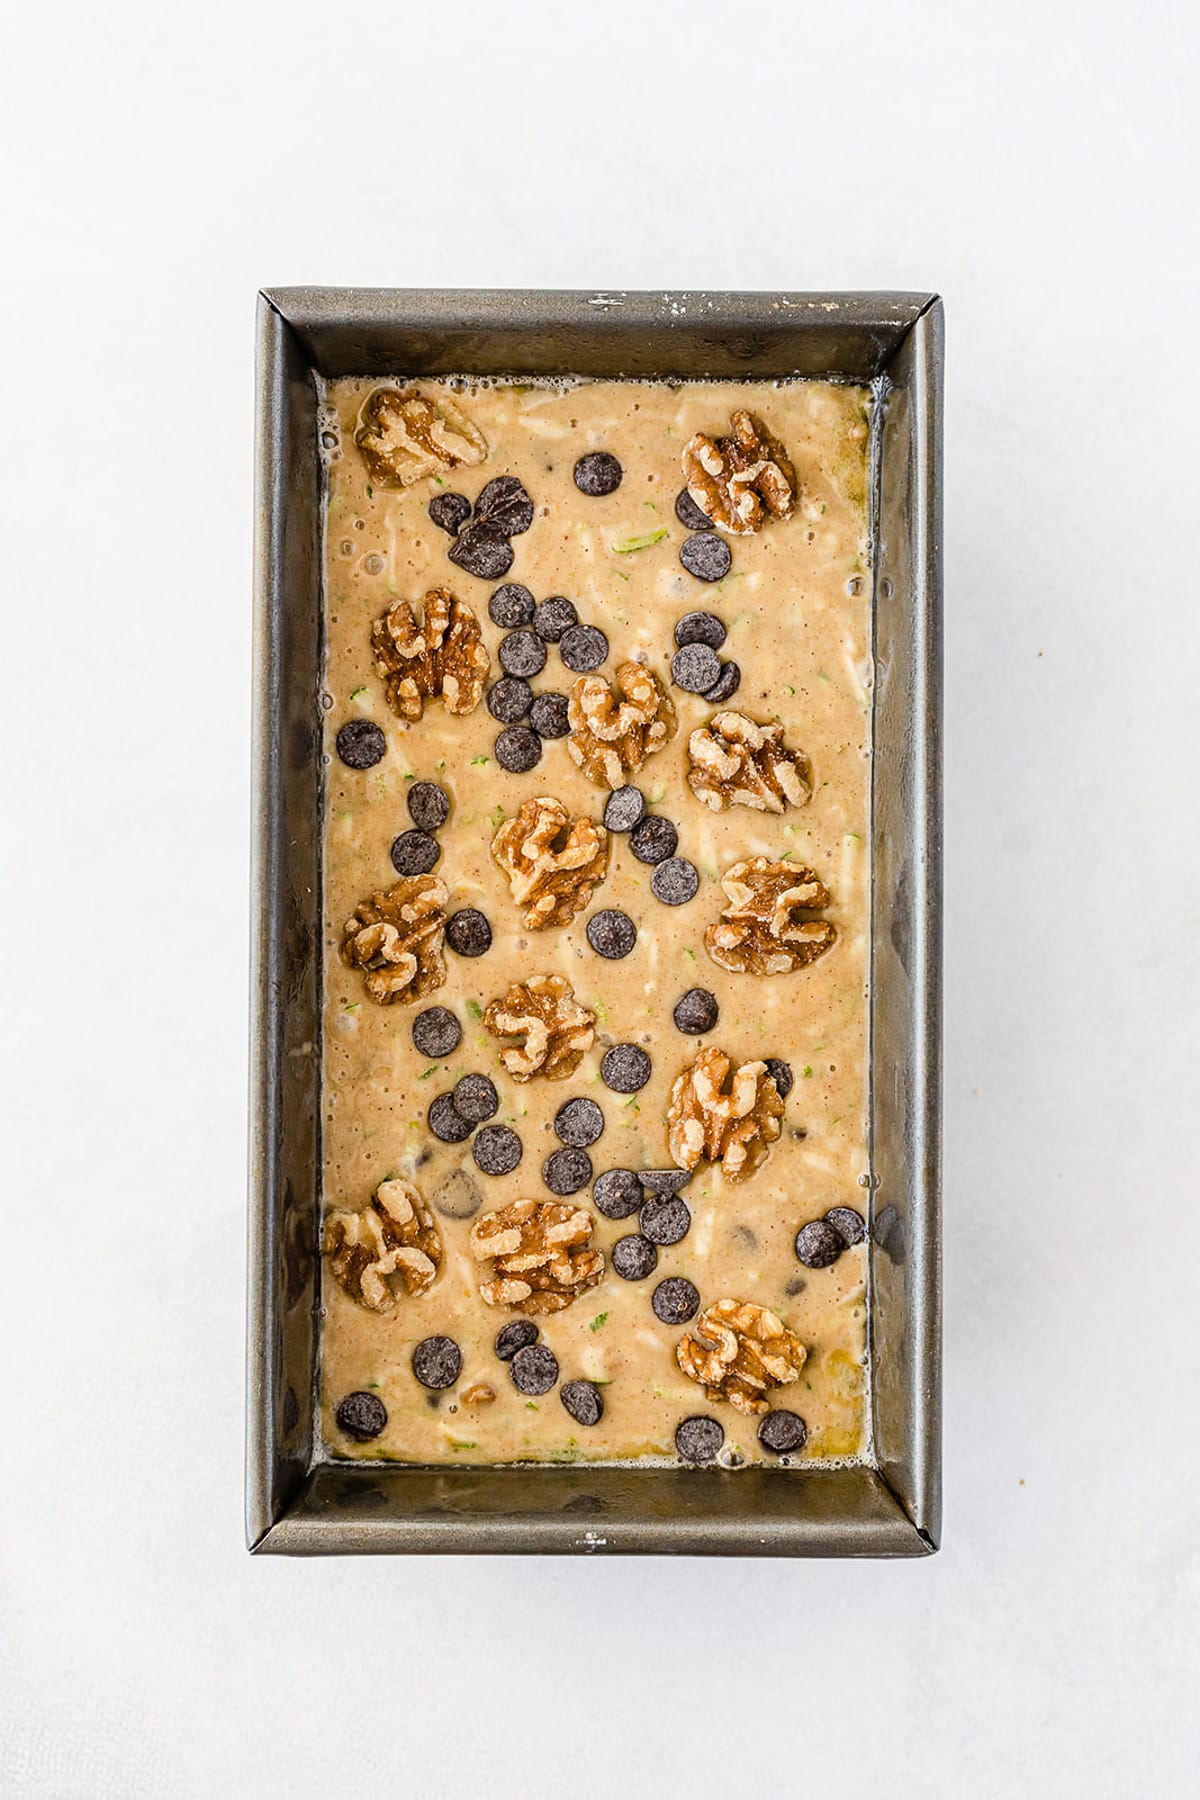 Chocolate chip walnut zucchini bread batter in a bread pan from overhead topped with extra chocolate chips and walnuts.